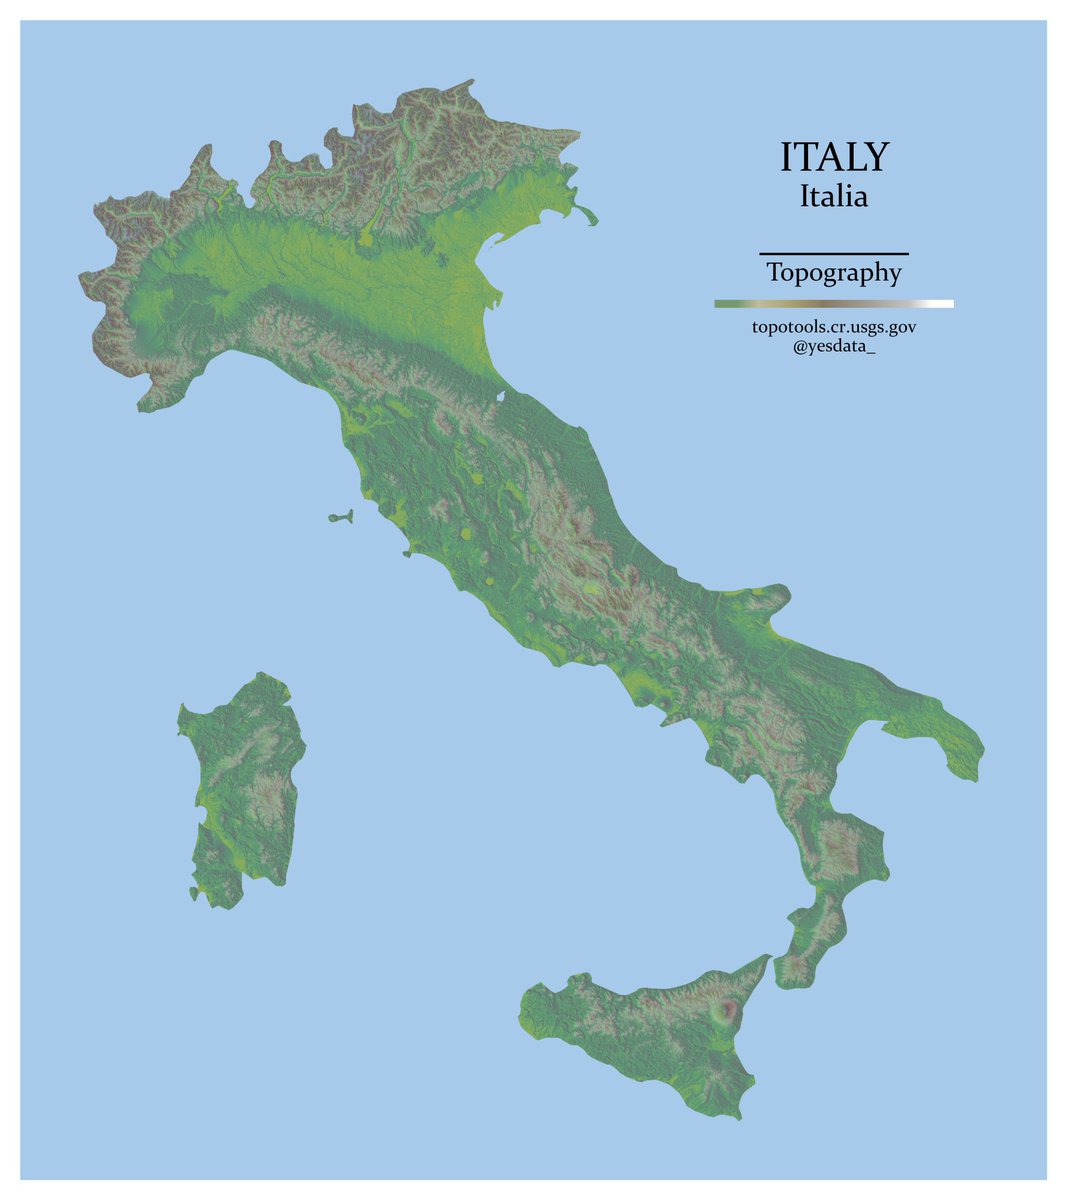 🇮🇹 Series: Topography (No. 2) - Italy

Italy’s topography is a diverse tapestry of mountains, plains, and coastlines. Its highest point, Mont Blanc, towers at 4,810 meters.

🔧 Tools: Python (Rasterio, Geopandas, EarthPy, Shapely)
~